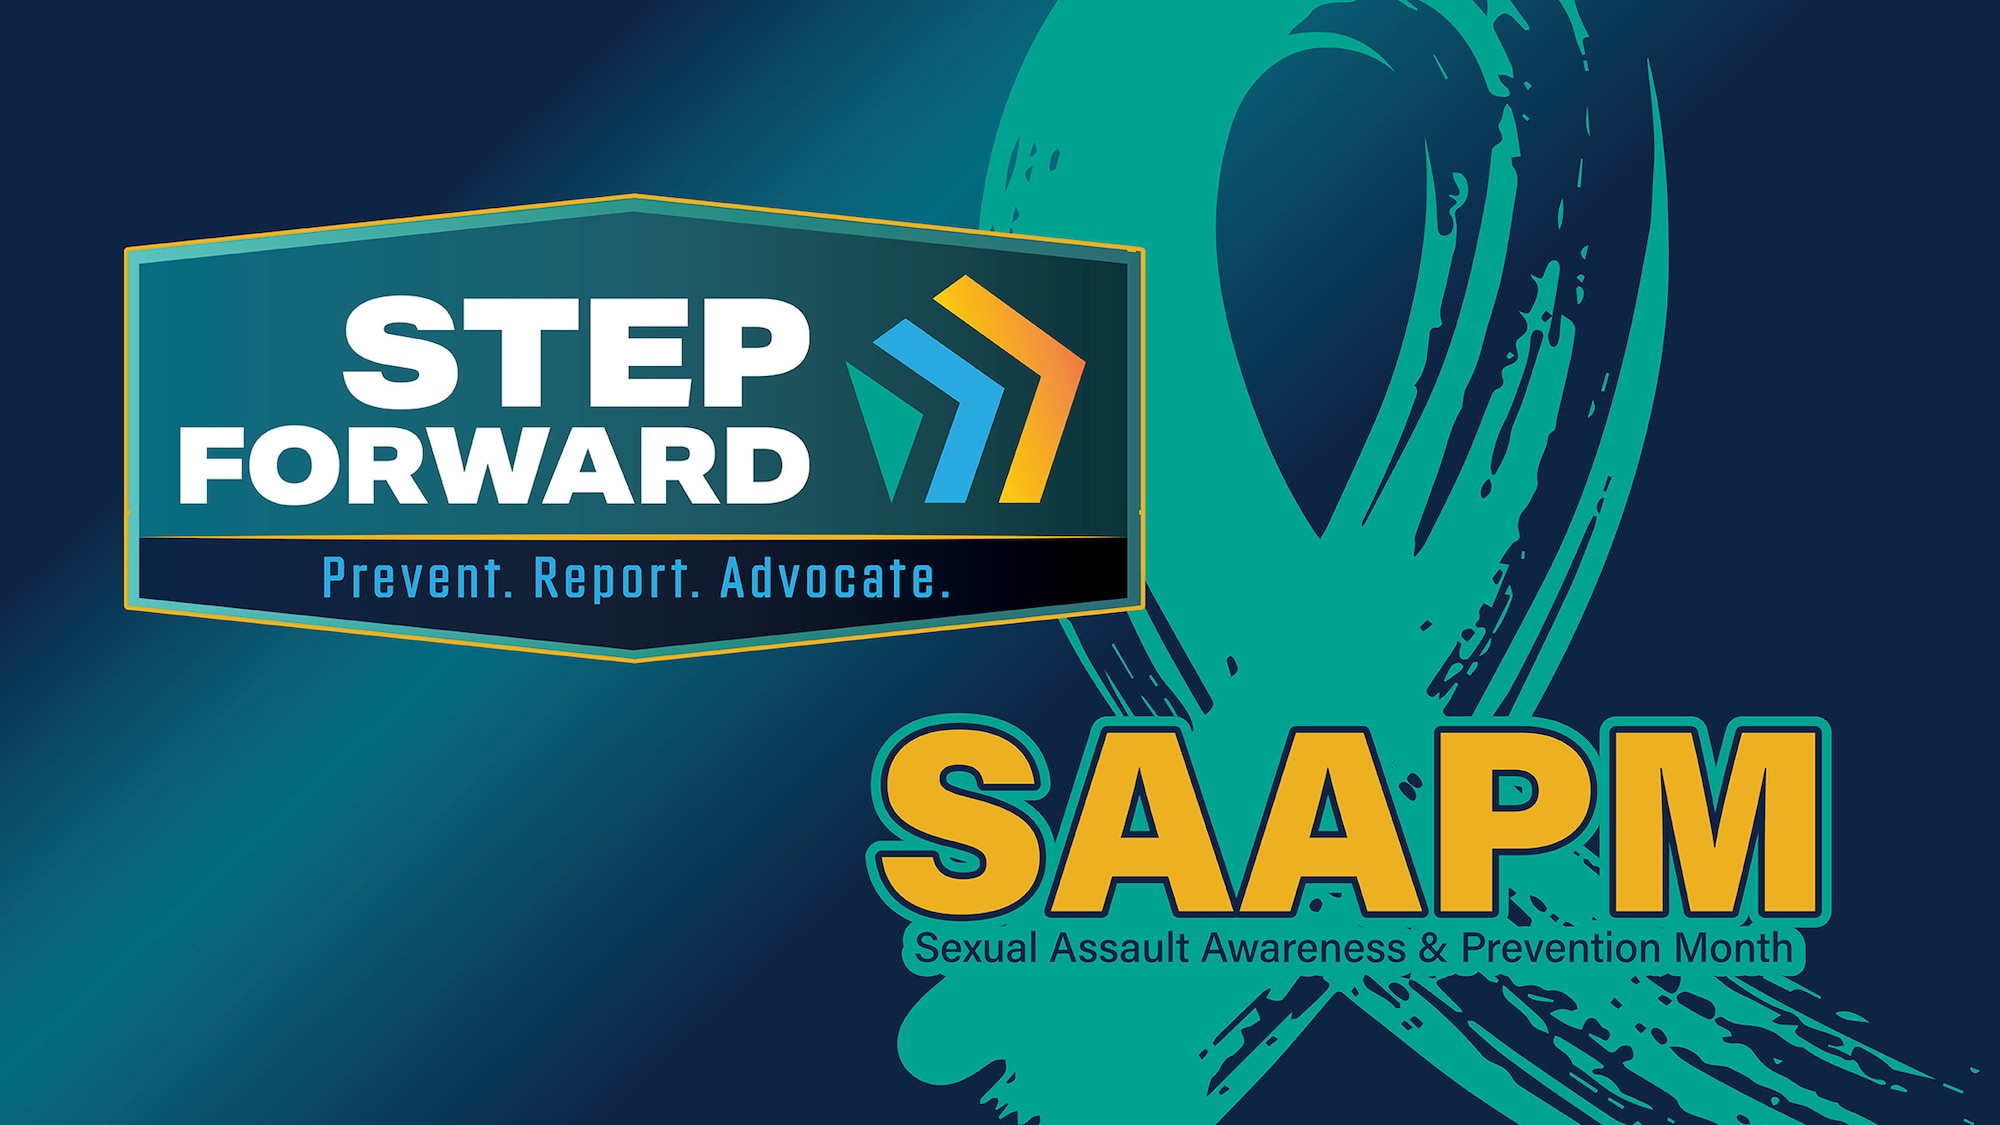 A SAAPM graphic featuring a teal ribbon and the theme "Step Forward. Prevent. Report. Advocate."